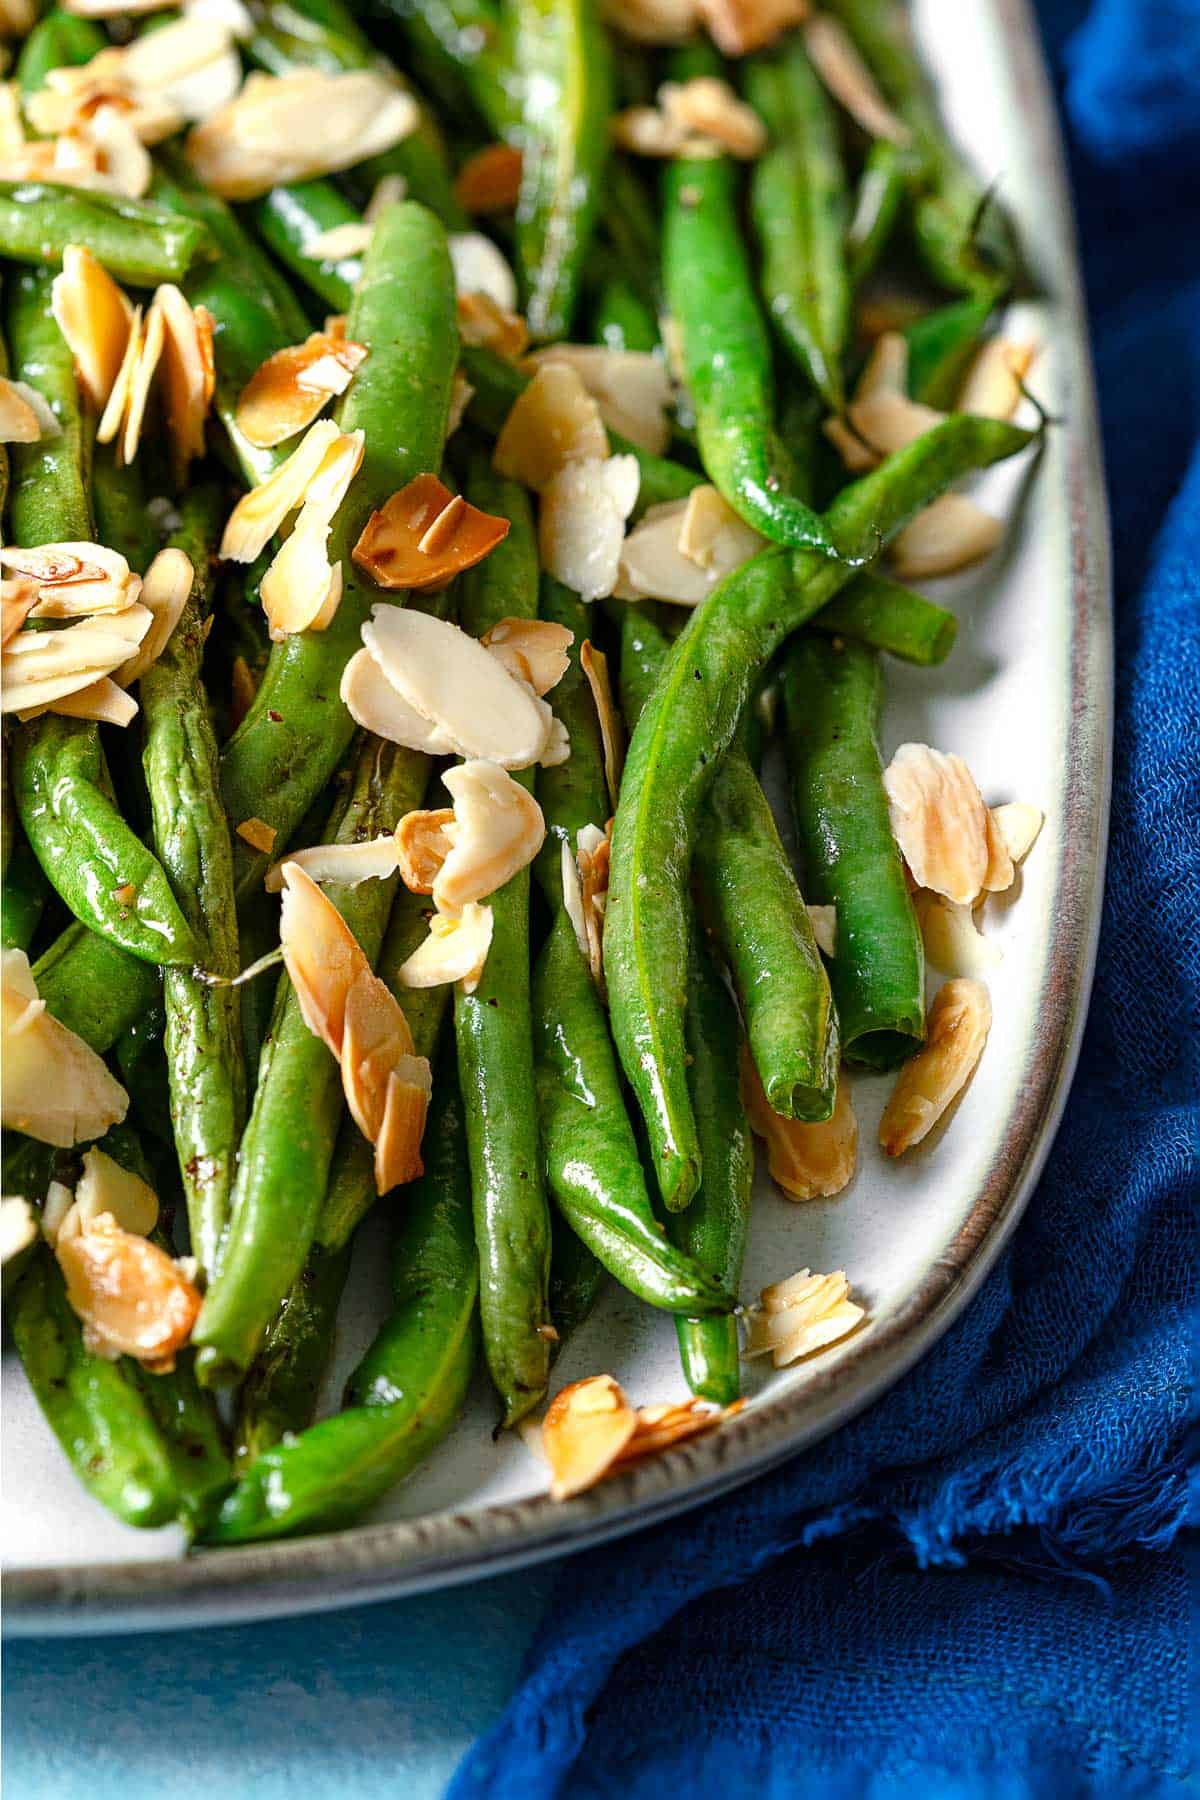 a close up of a platter of roasted green beans garnished with sliced almonds.